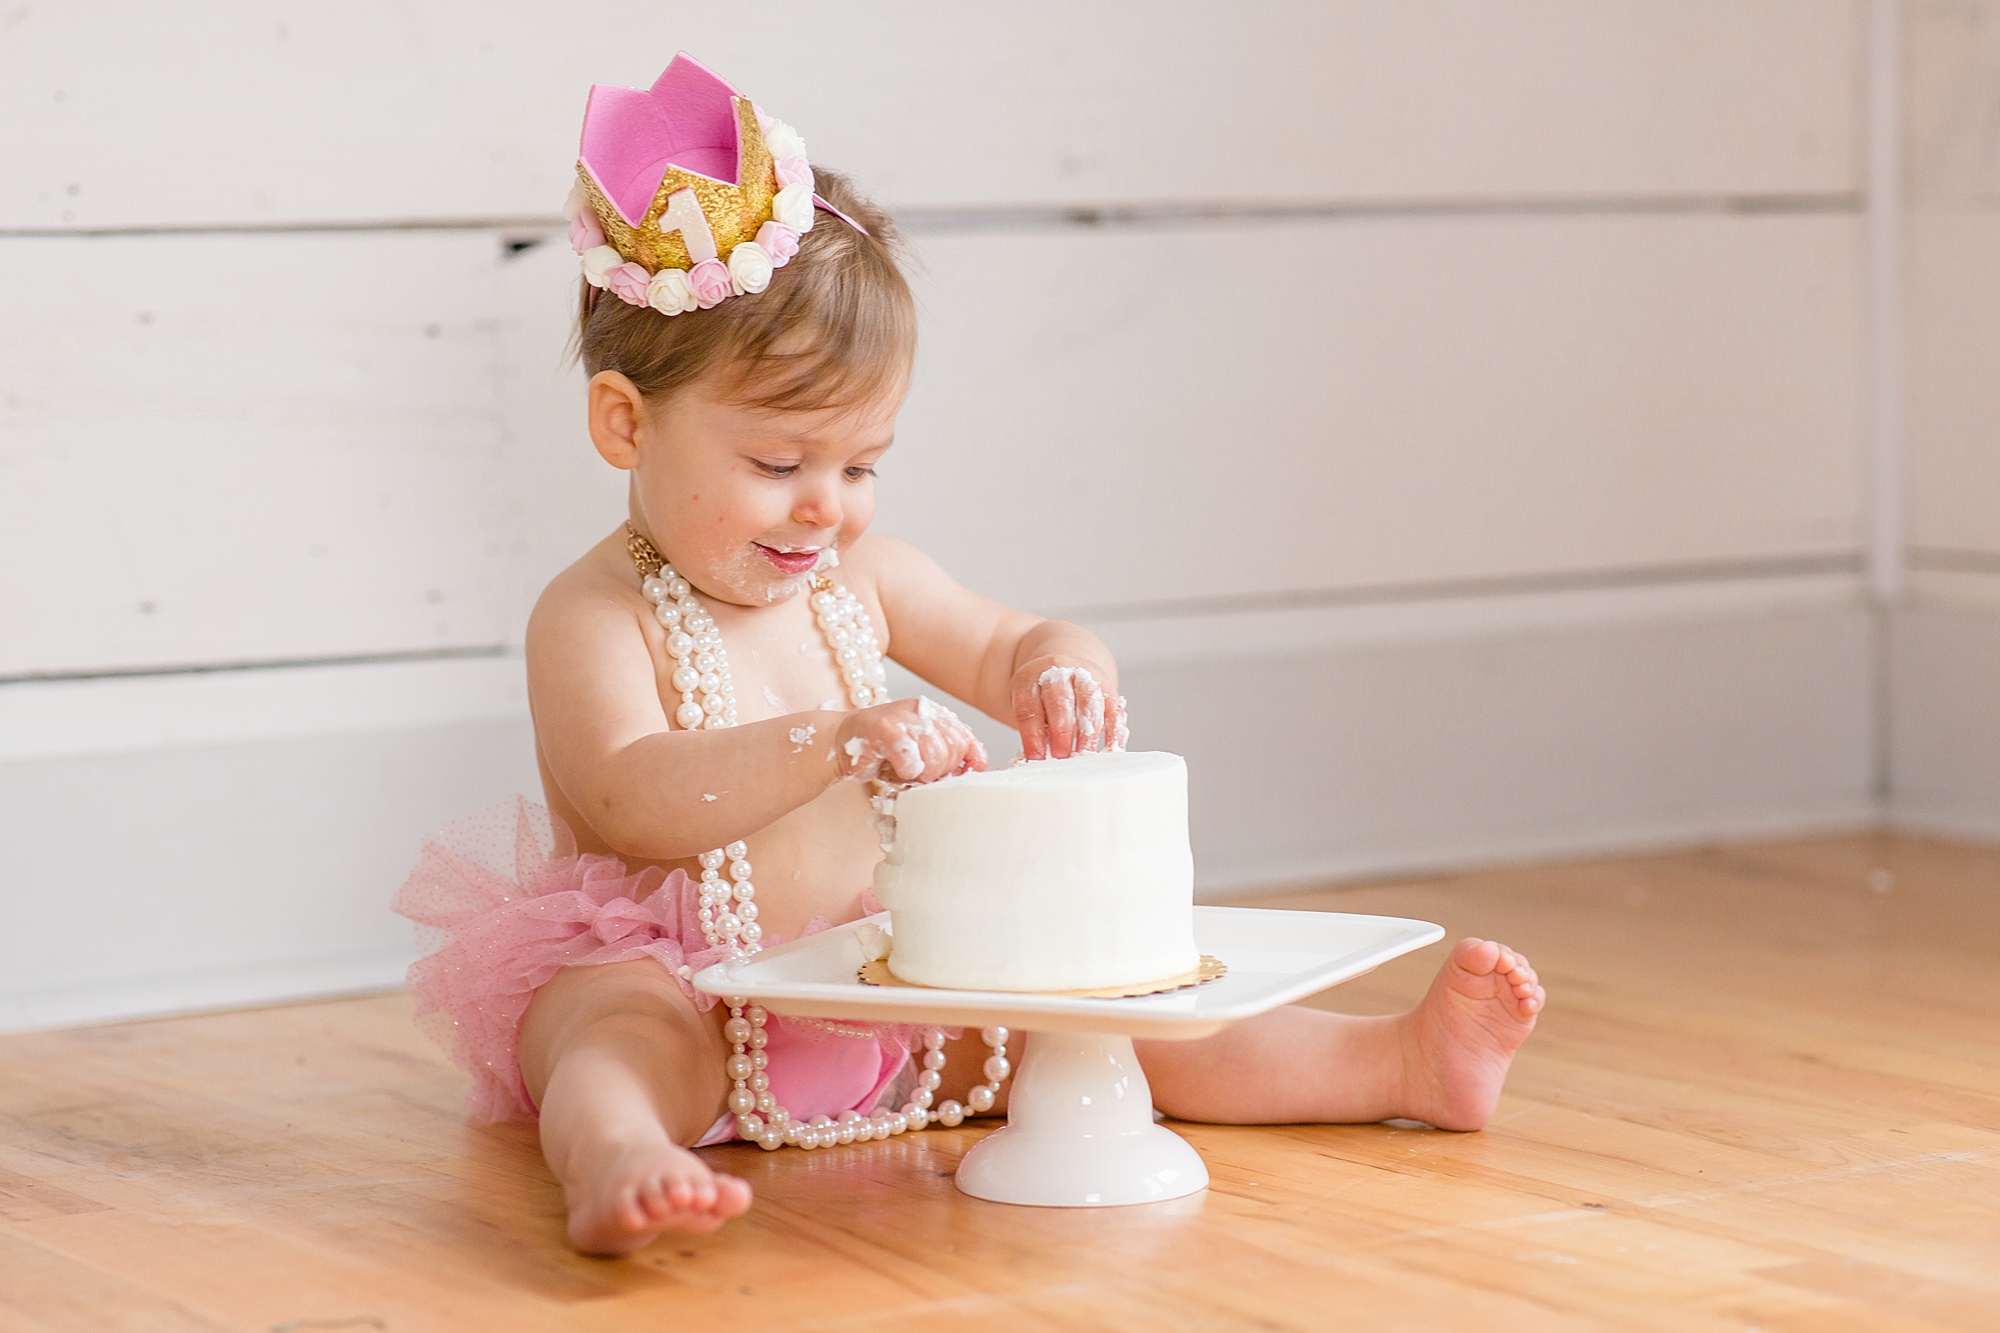 one year old plays with cake